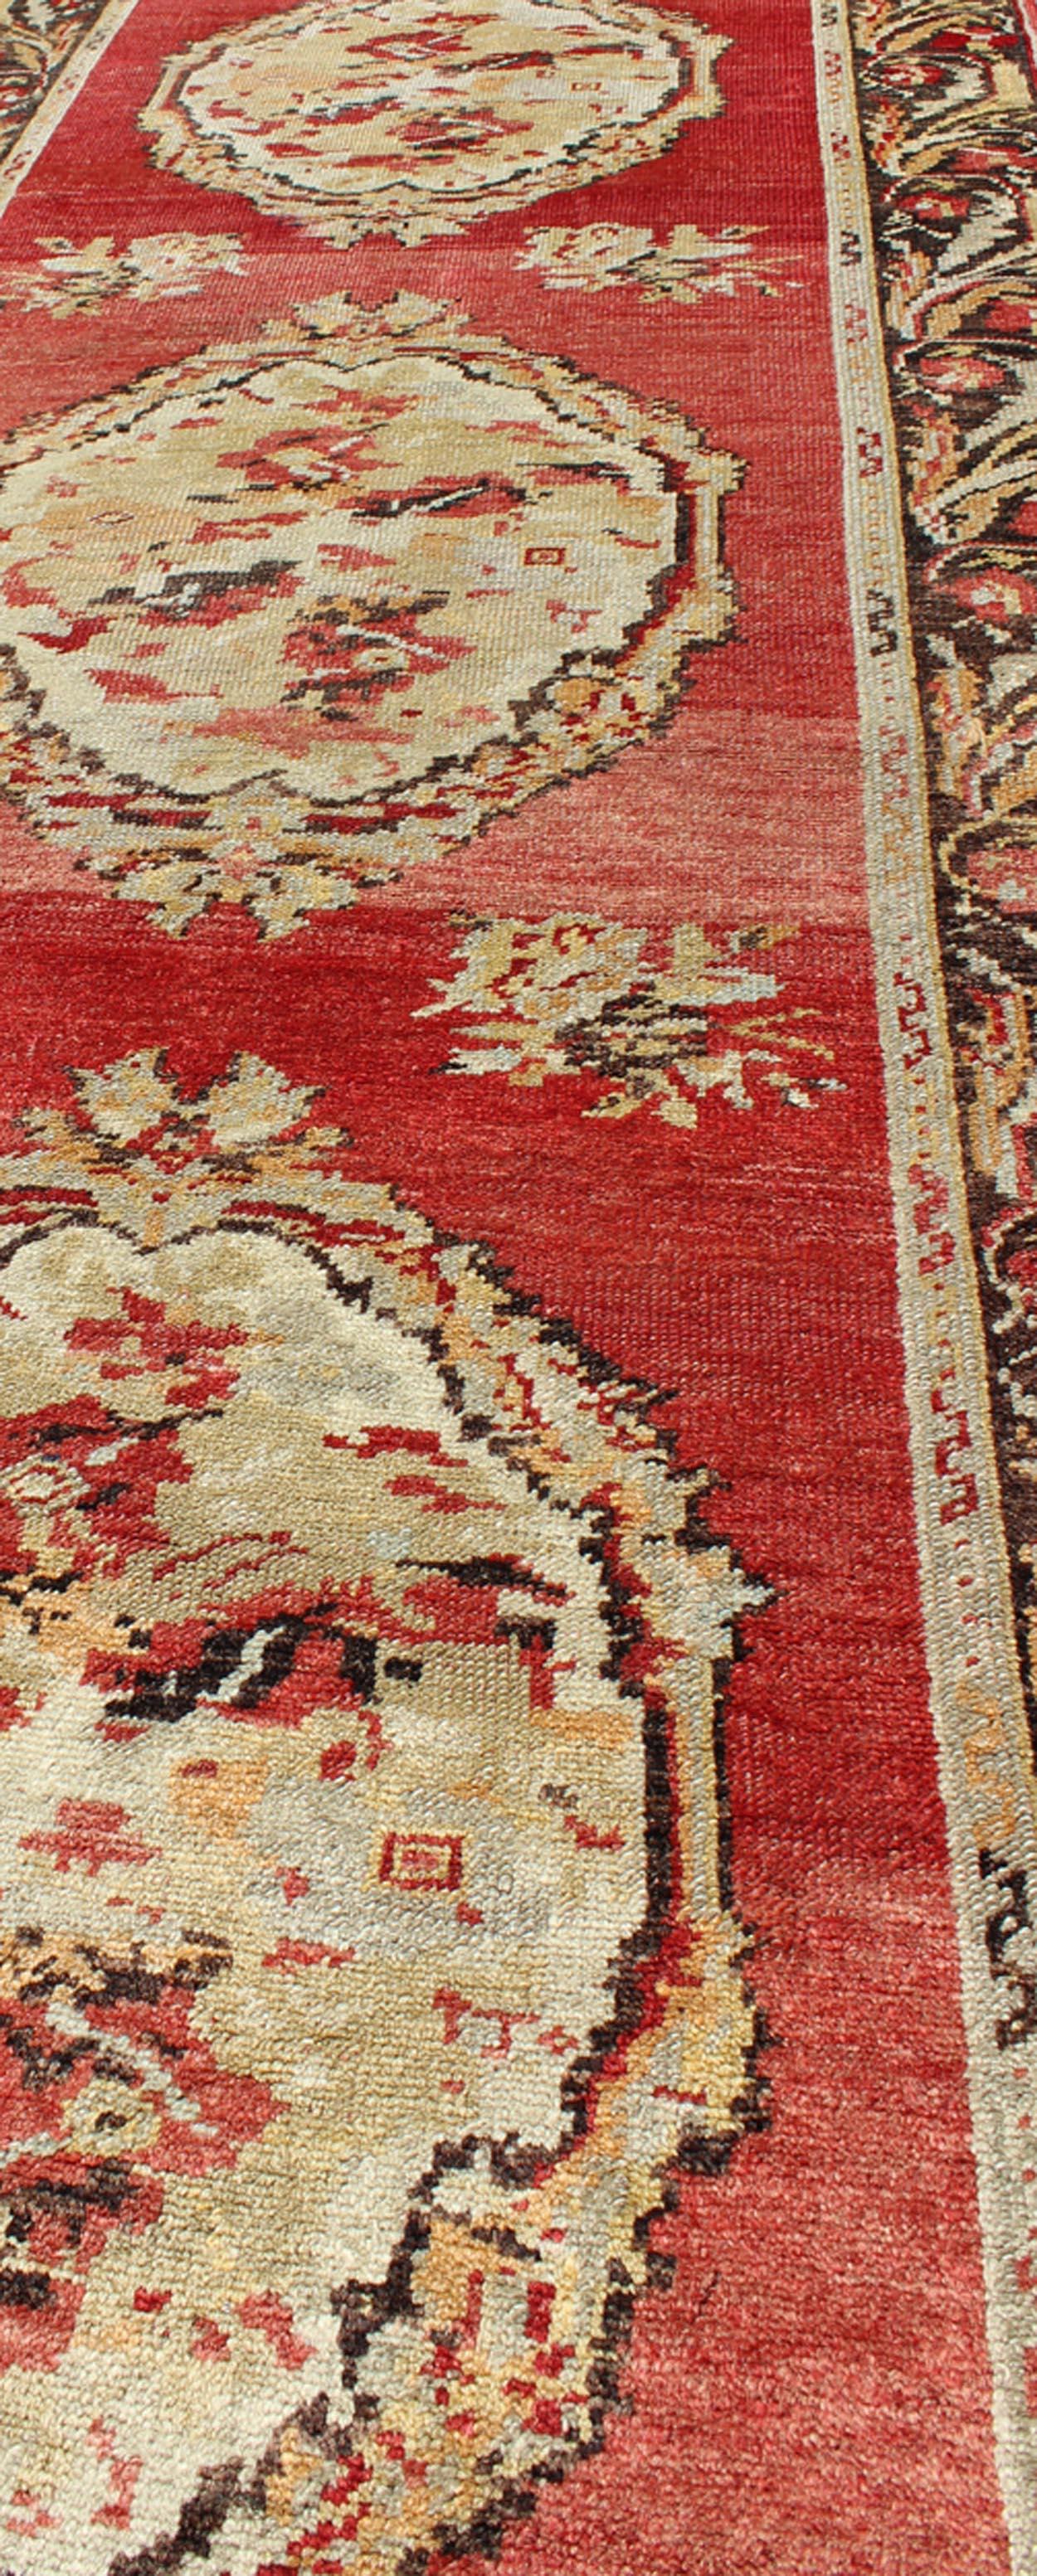 Antique Turkish Oushak Runner With European Design in Red, Brown and Green For Sale 1